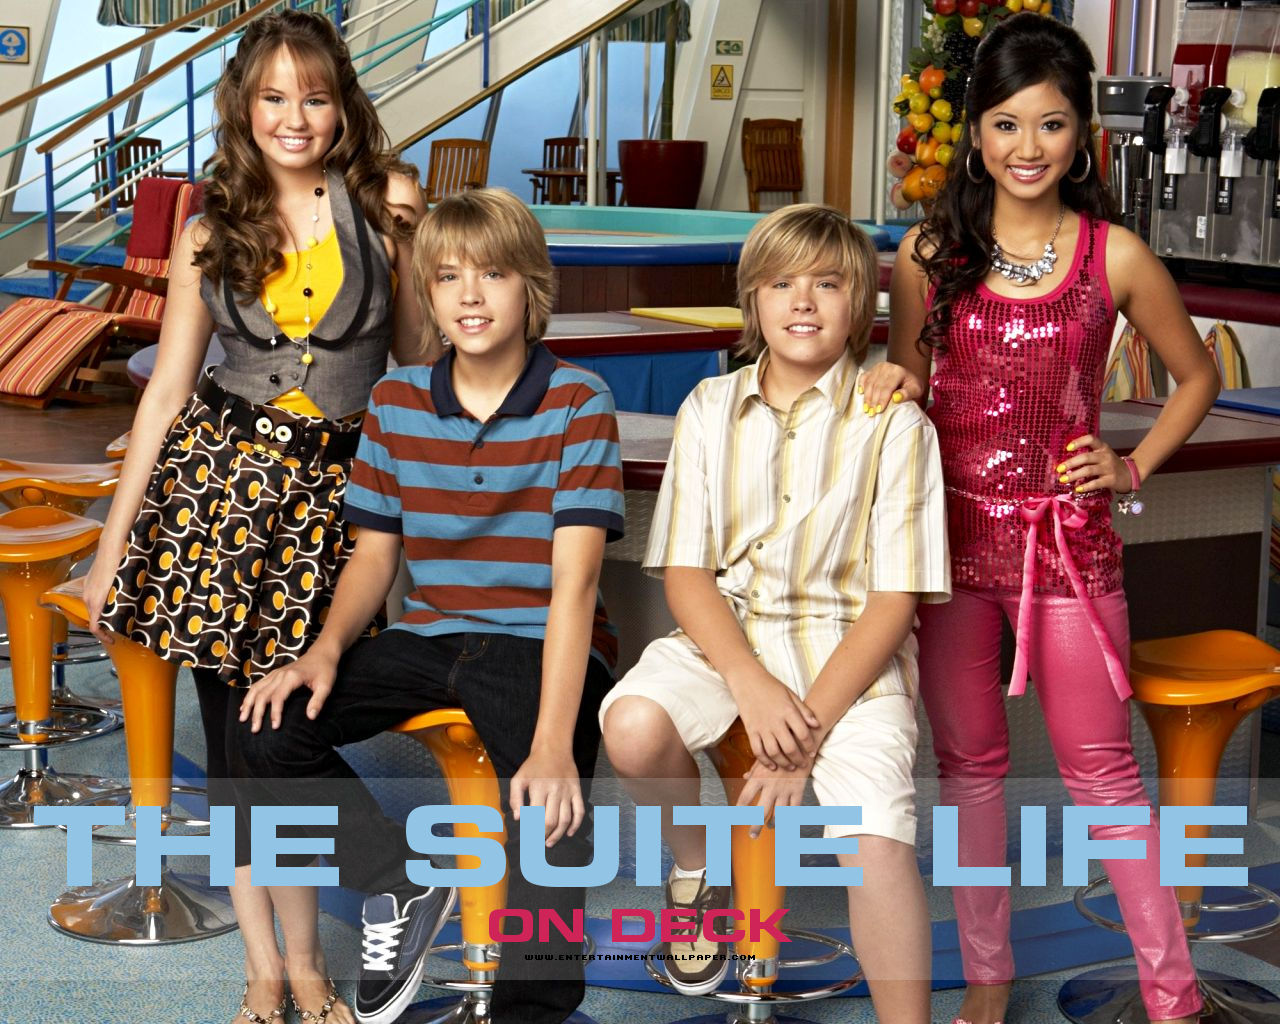 Watch The Suite Life On Deck Season 1 Online Watch Full The Suite